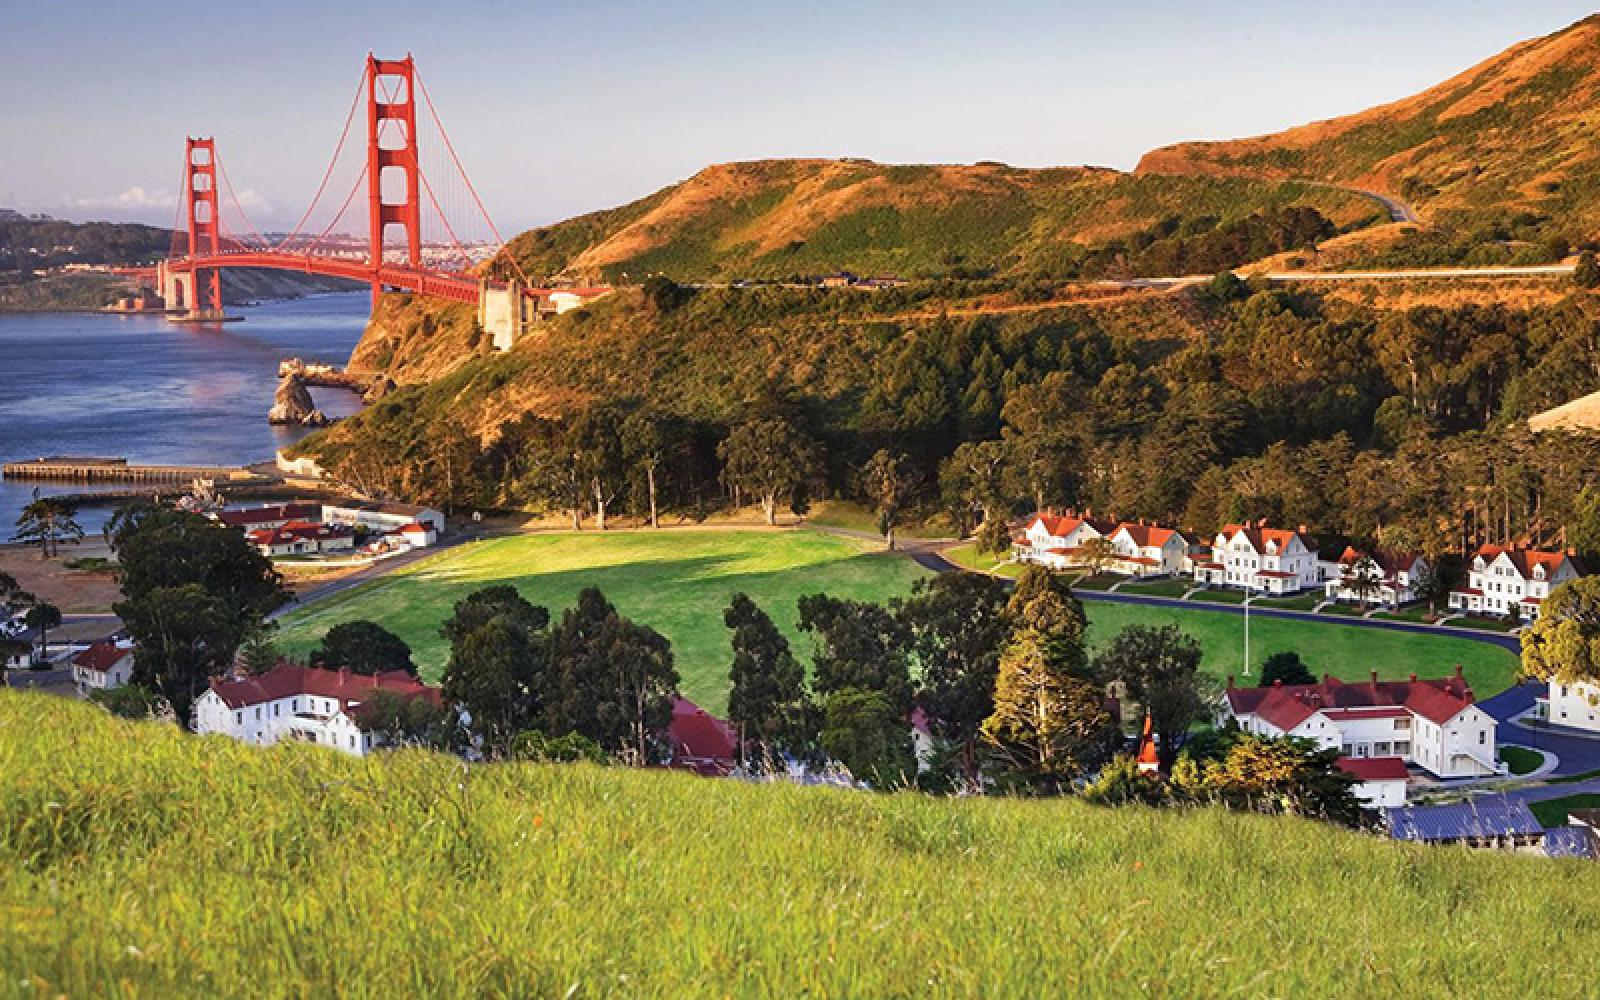 View of the Golden Gate Bridge from Cavallo Point in Sausalito, CA.